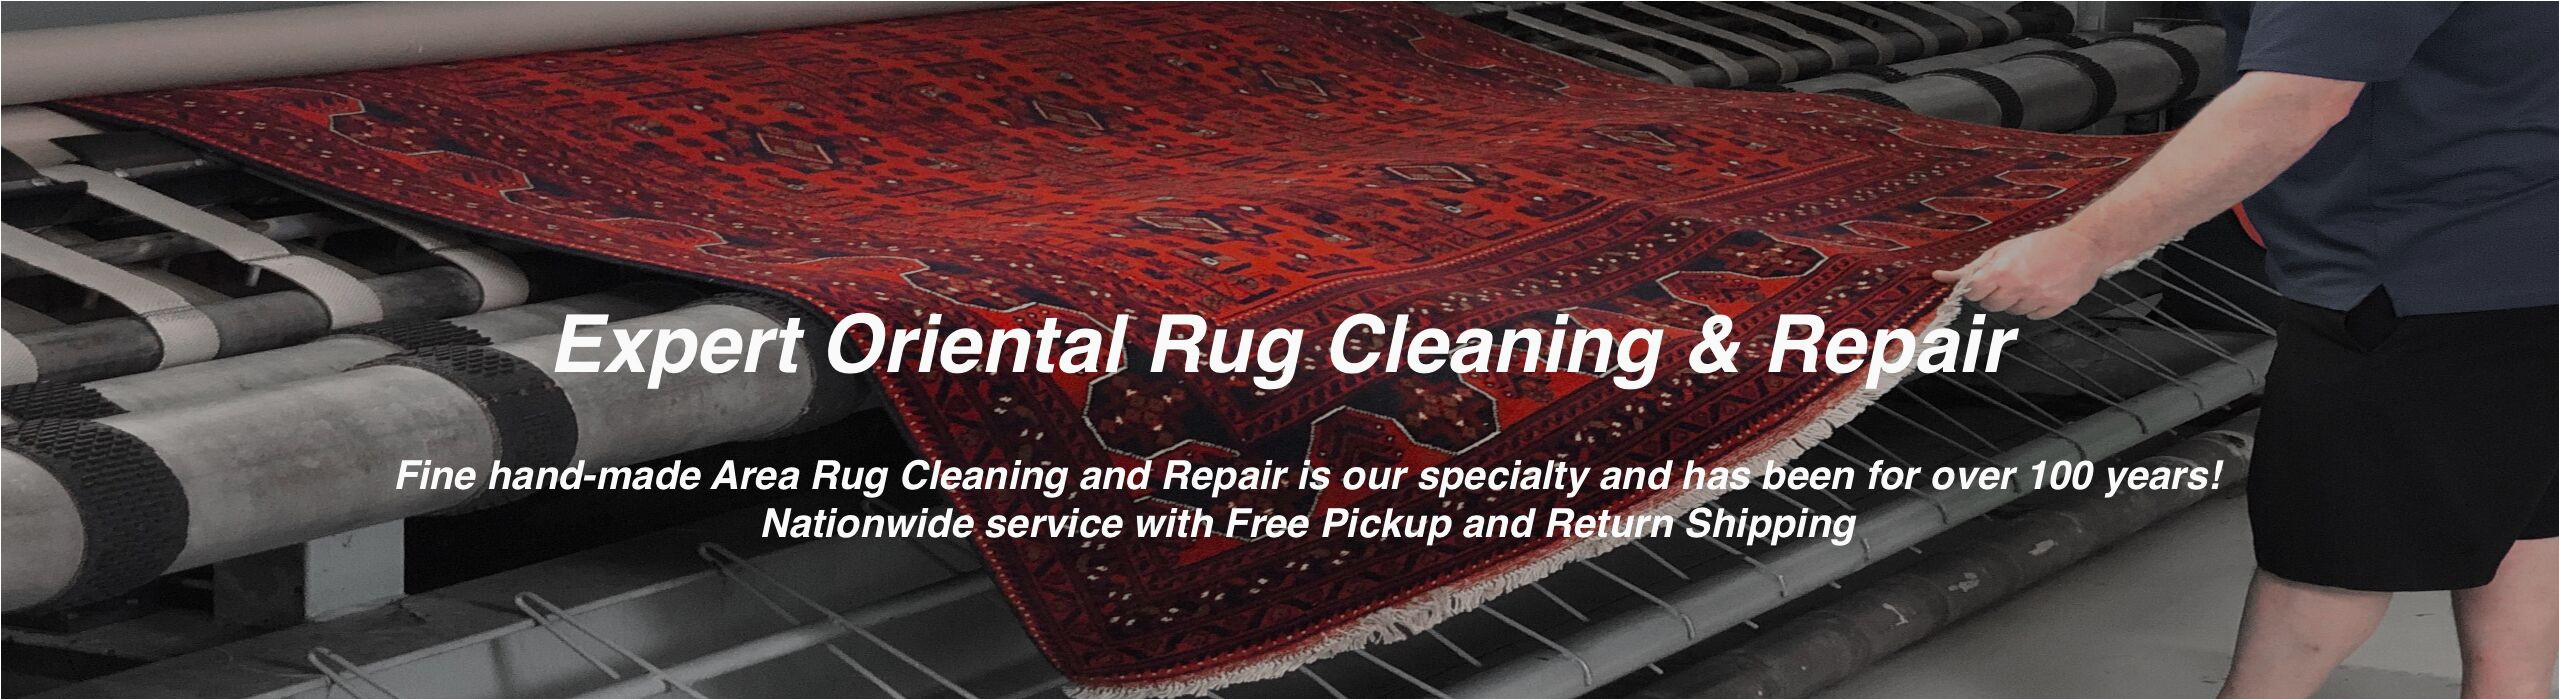 Area Rug Cleaning and Repair Near Me Professional area Rug Cleaning & Repair Rugspa